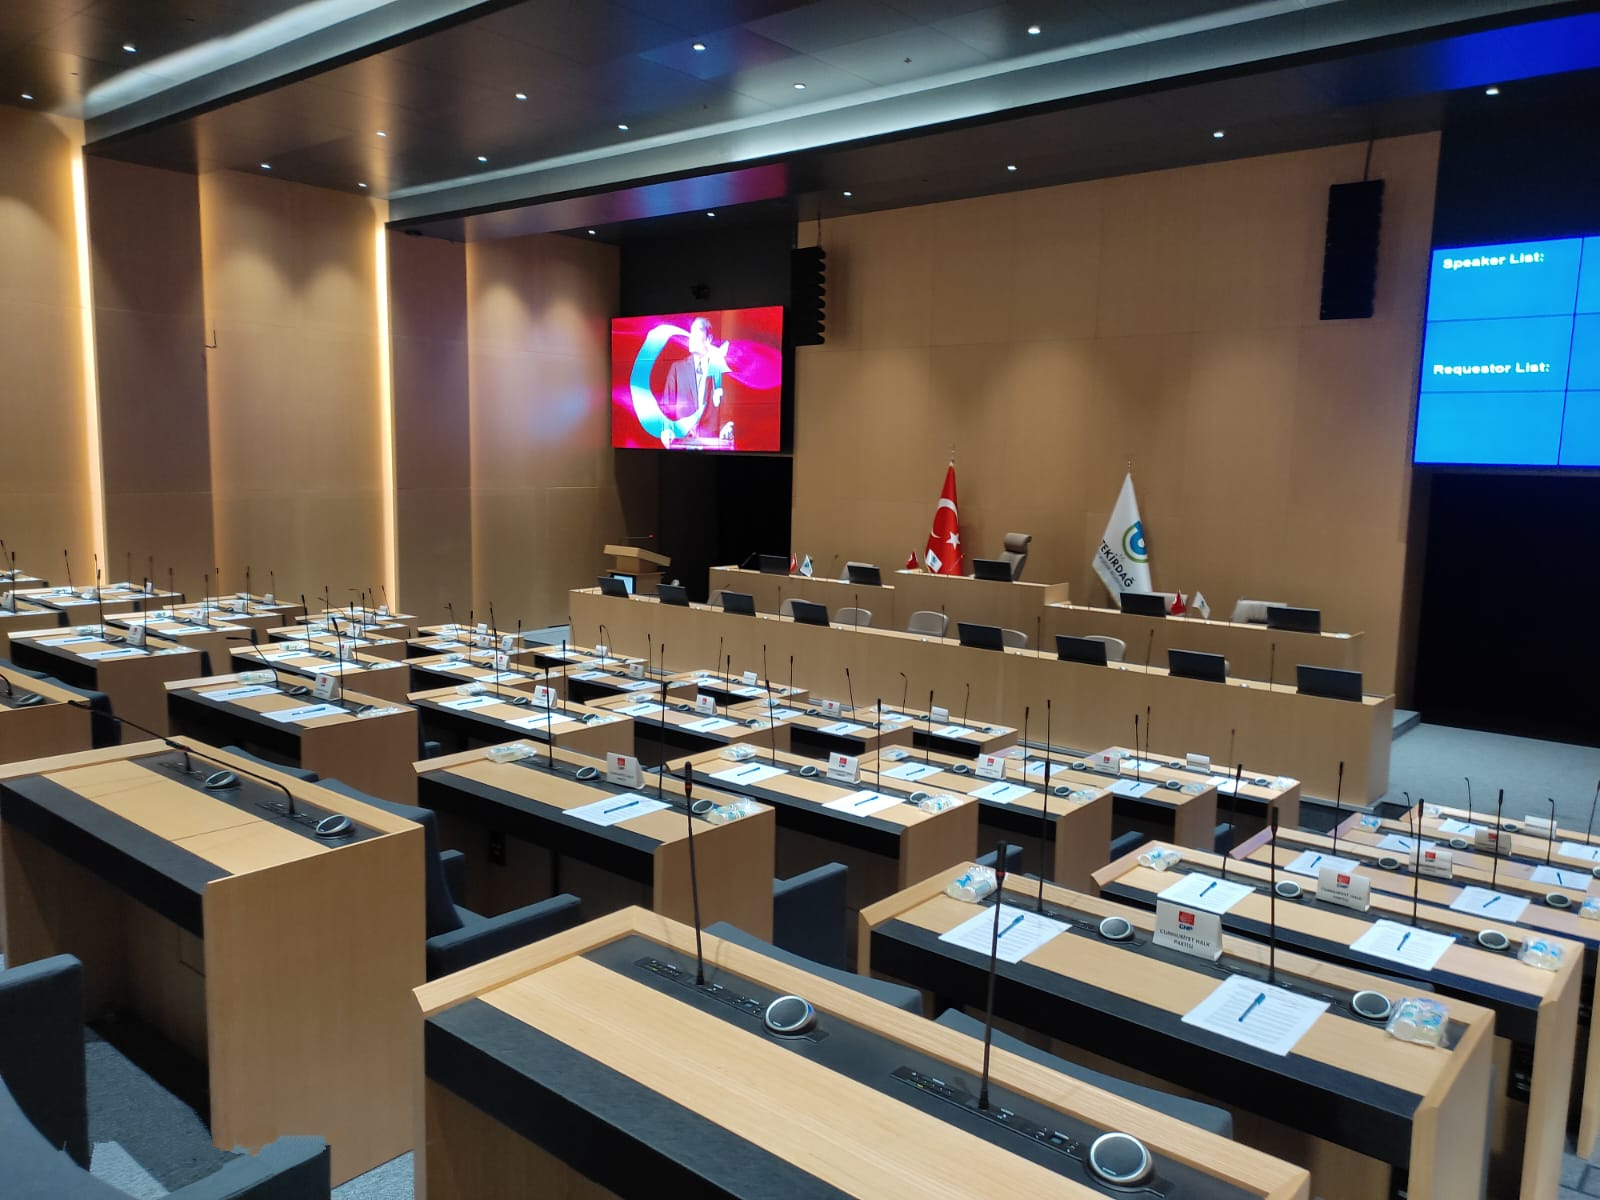 Design Principles for Intelligent Conference Room Systems